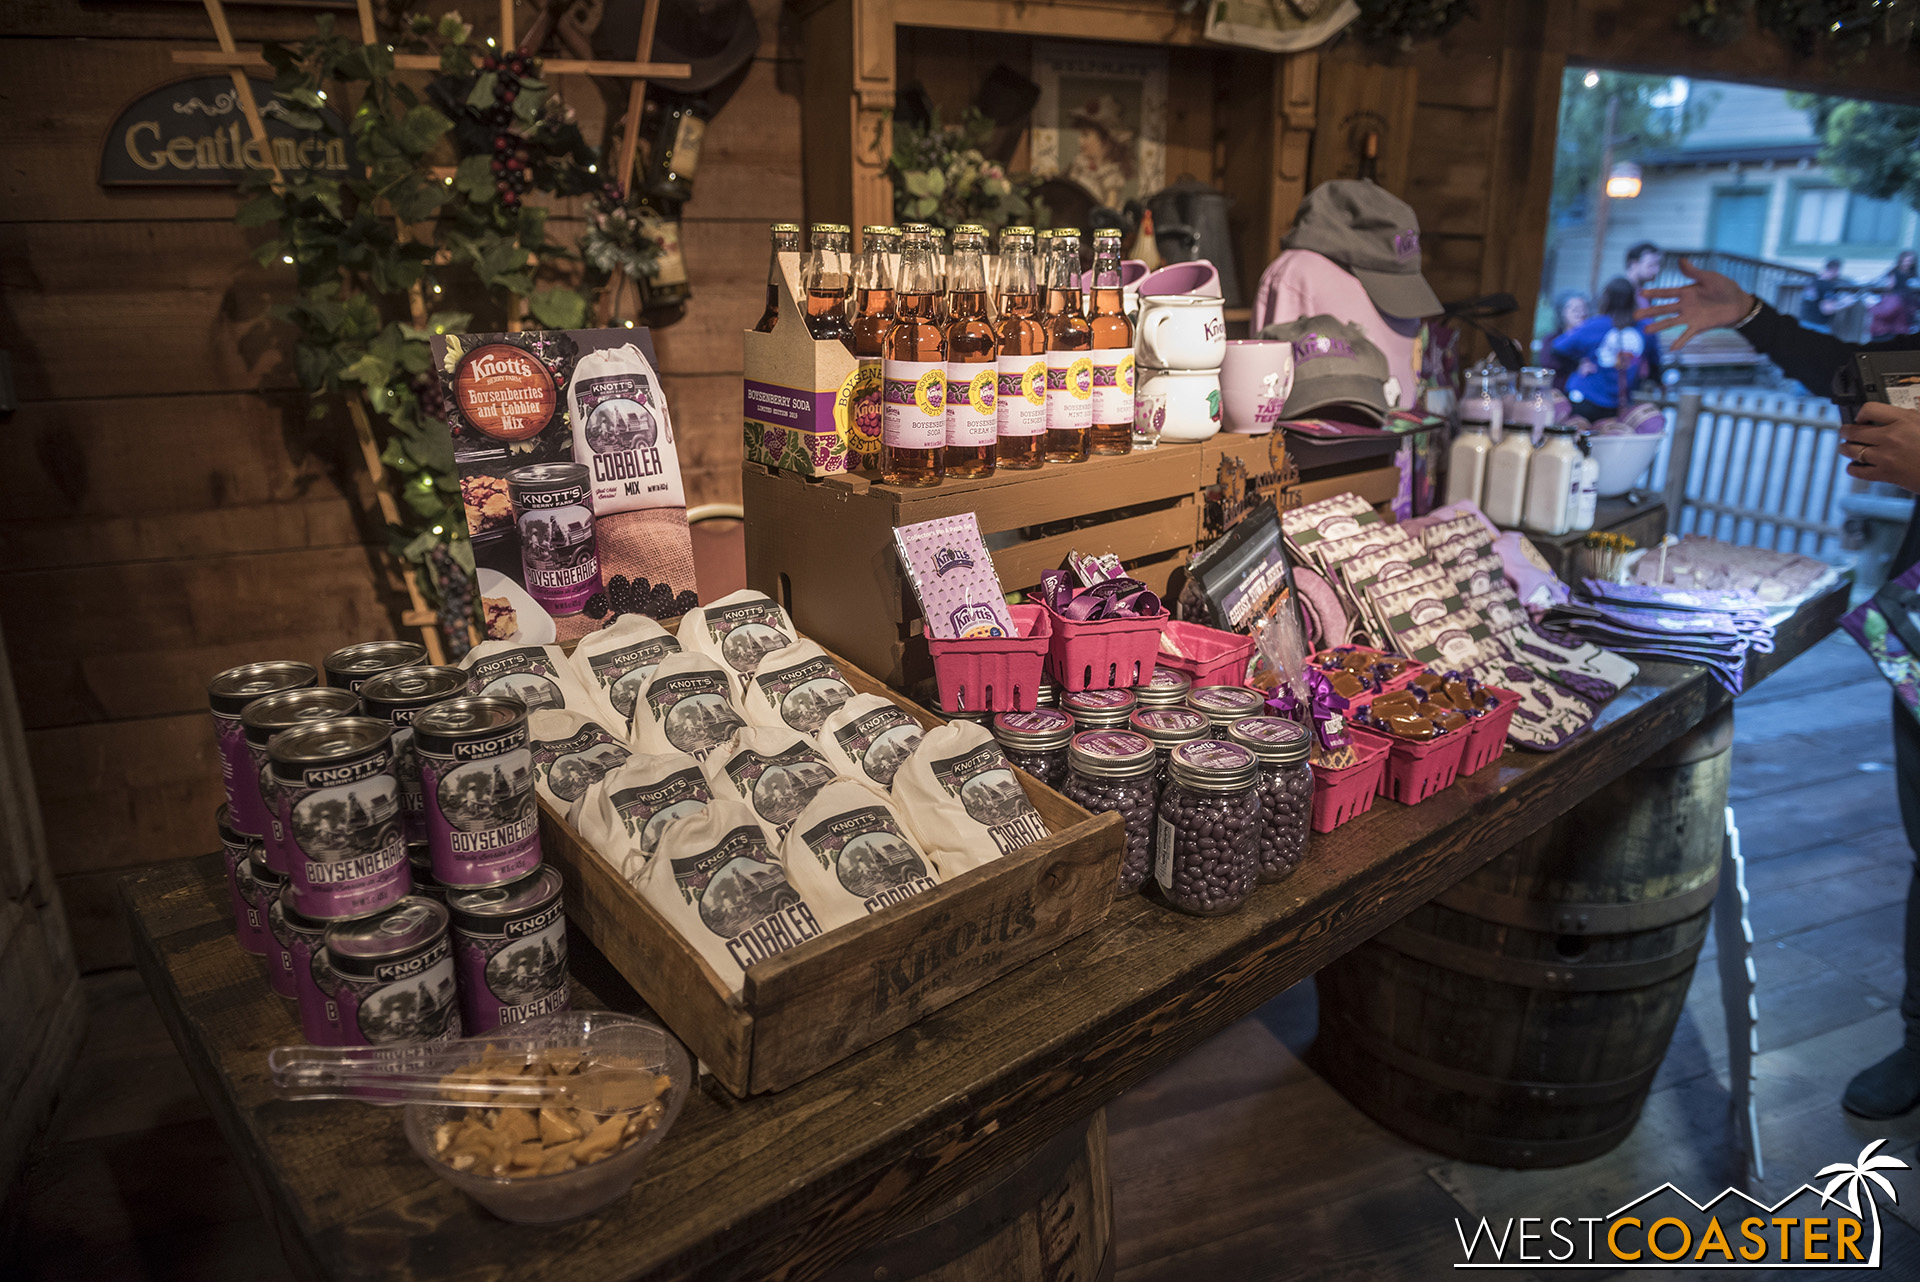  Want to take home something boysenberry for later consumption?  Knott’s has you covered! 